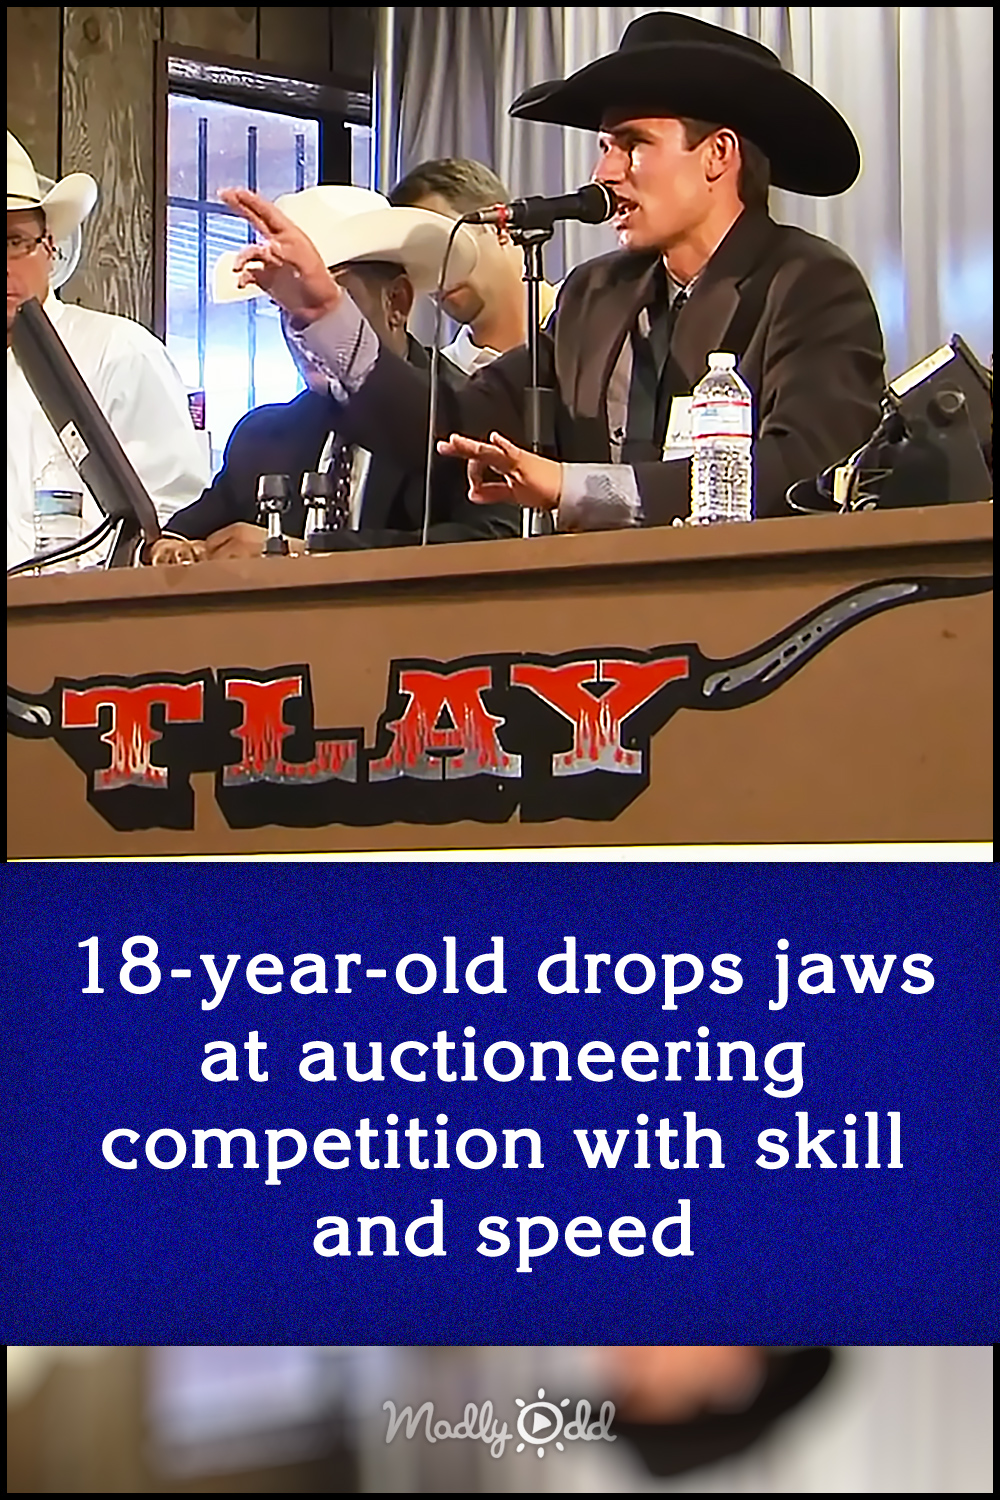 18-year-old drops jaws at auctioneering competition with skill and speed